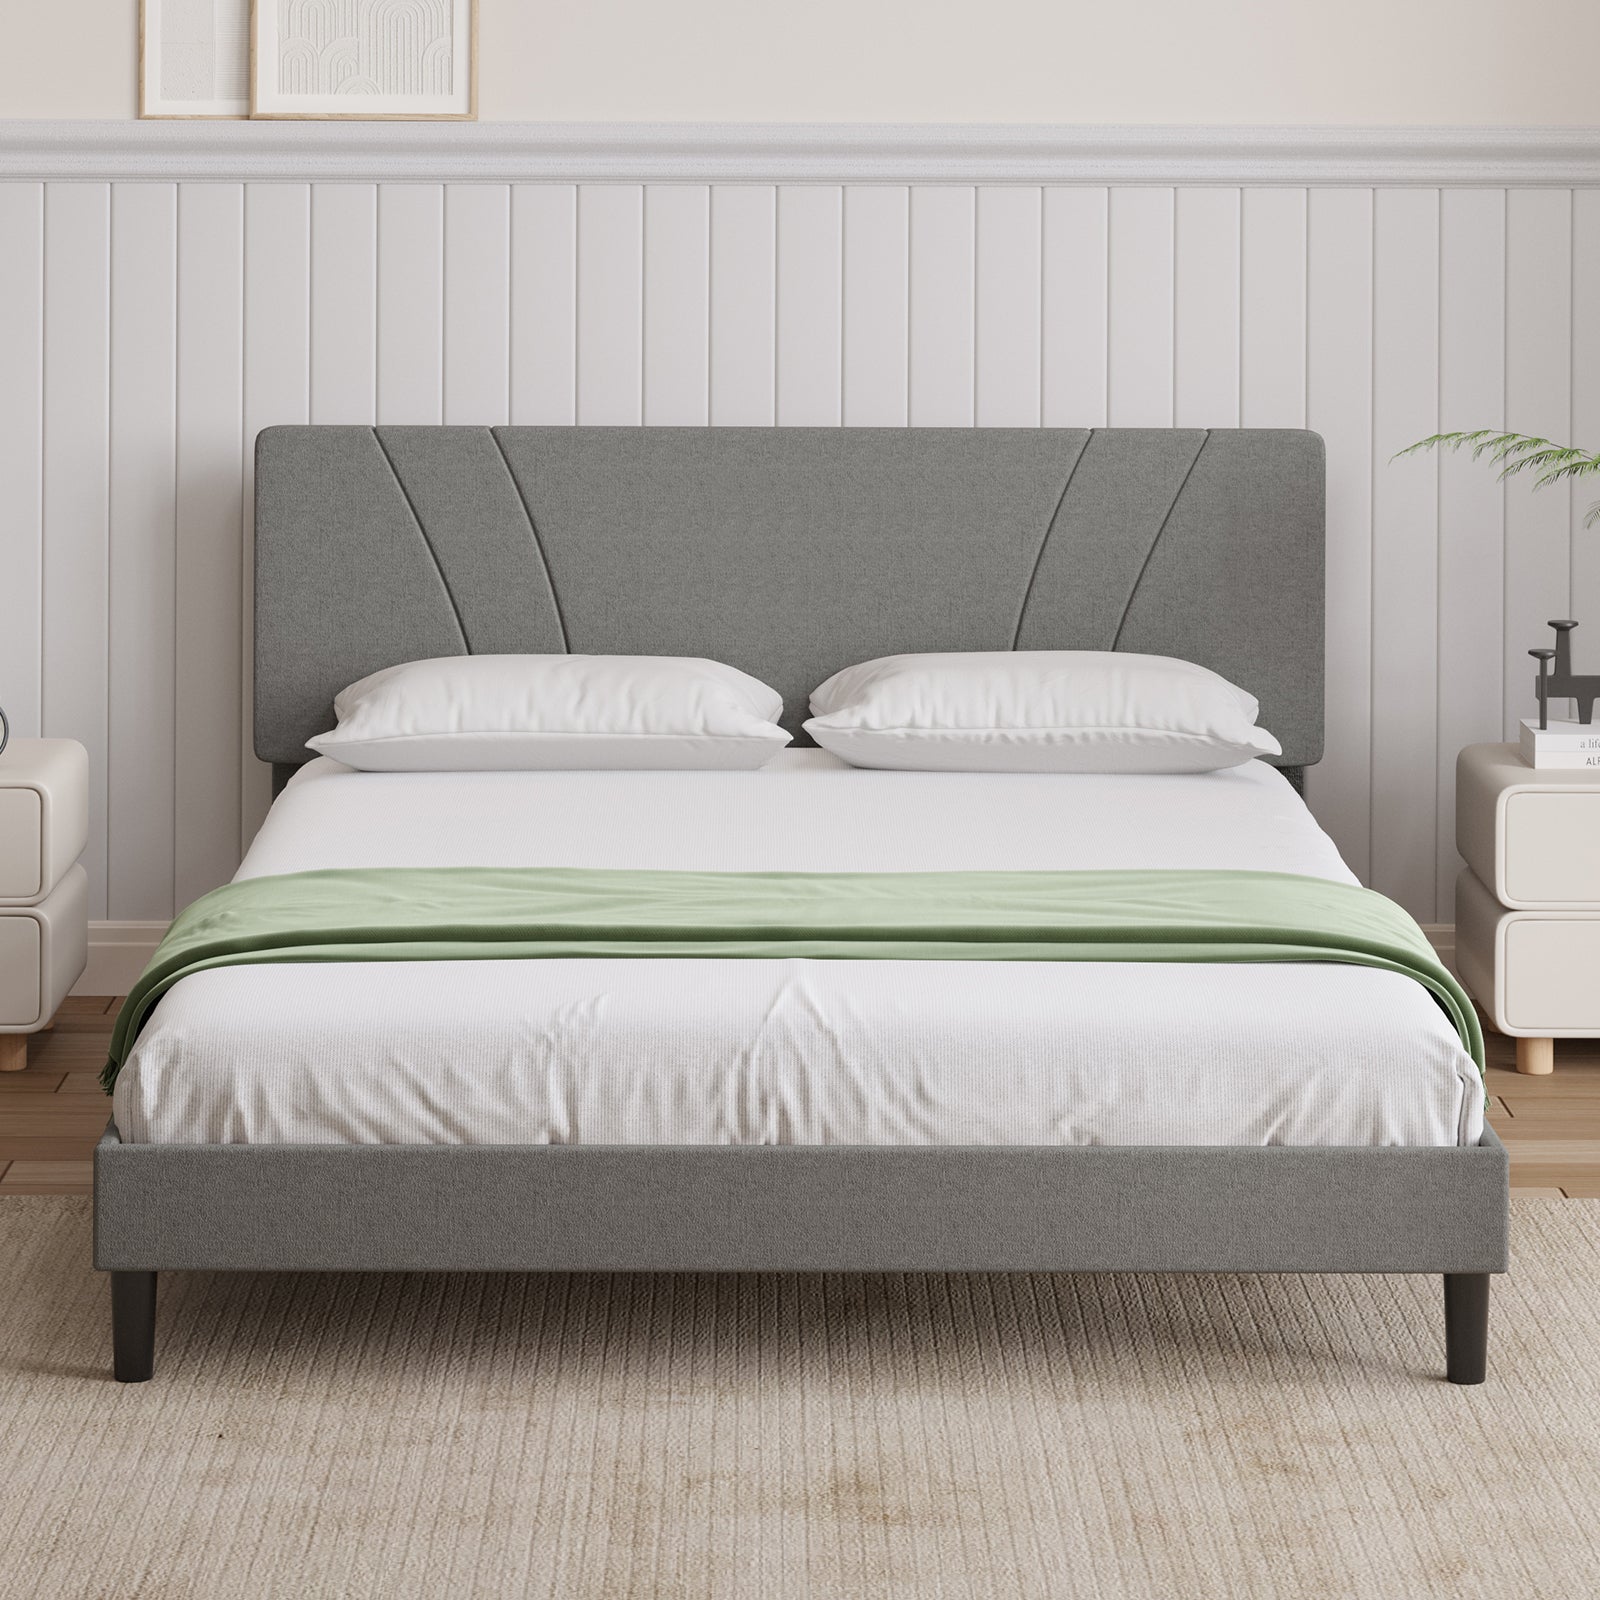 Classic Bed Frame with Headboard